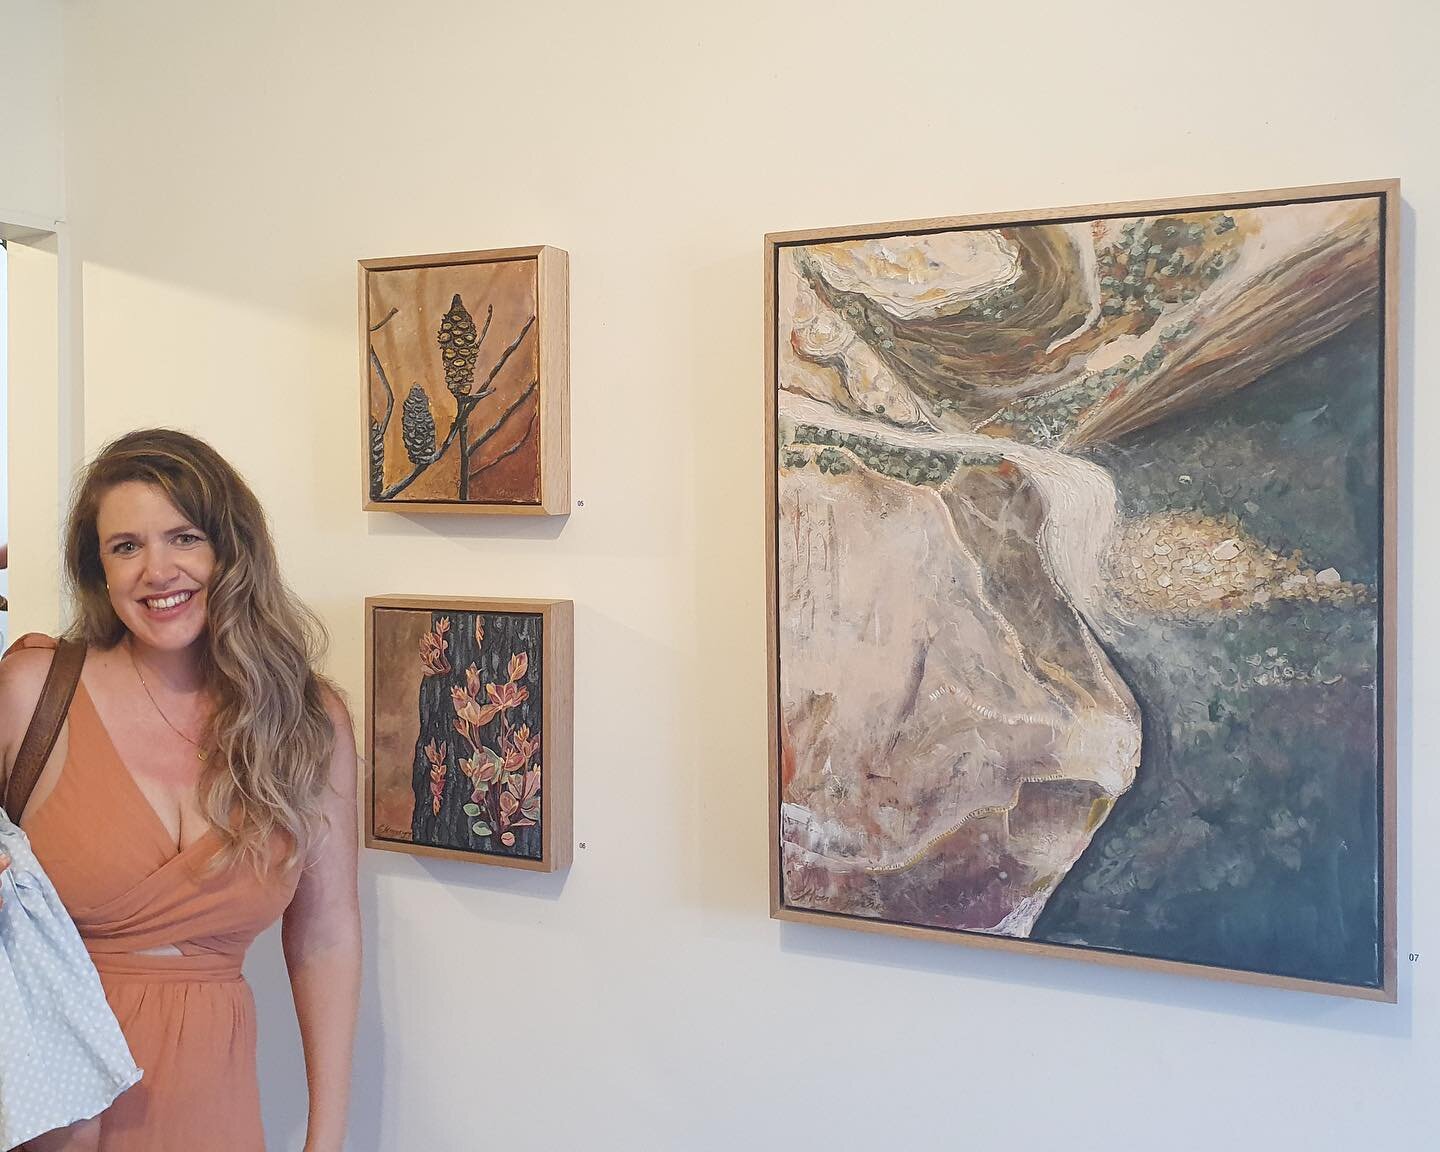 Token shot with my pieces for &lsquo;The After&rsquo; exhibition because I got my very first gallery sale and red dot 🔴 for the large piece! 🍾 
.
What an incredible experience this has been, planning and being in this exhibition with Newcastle arti